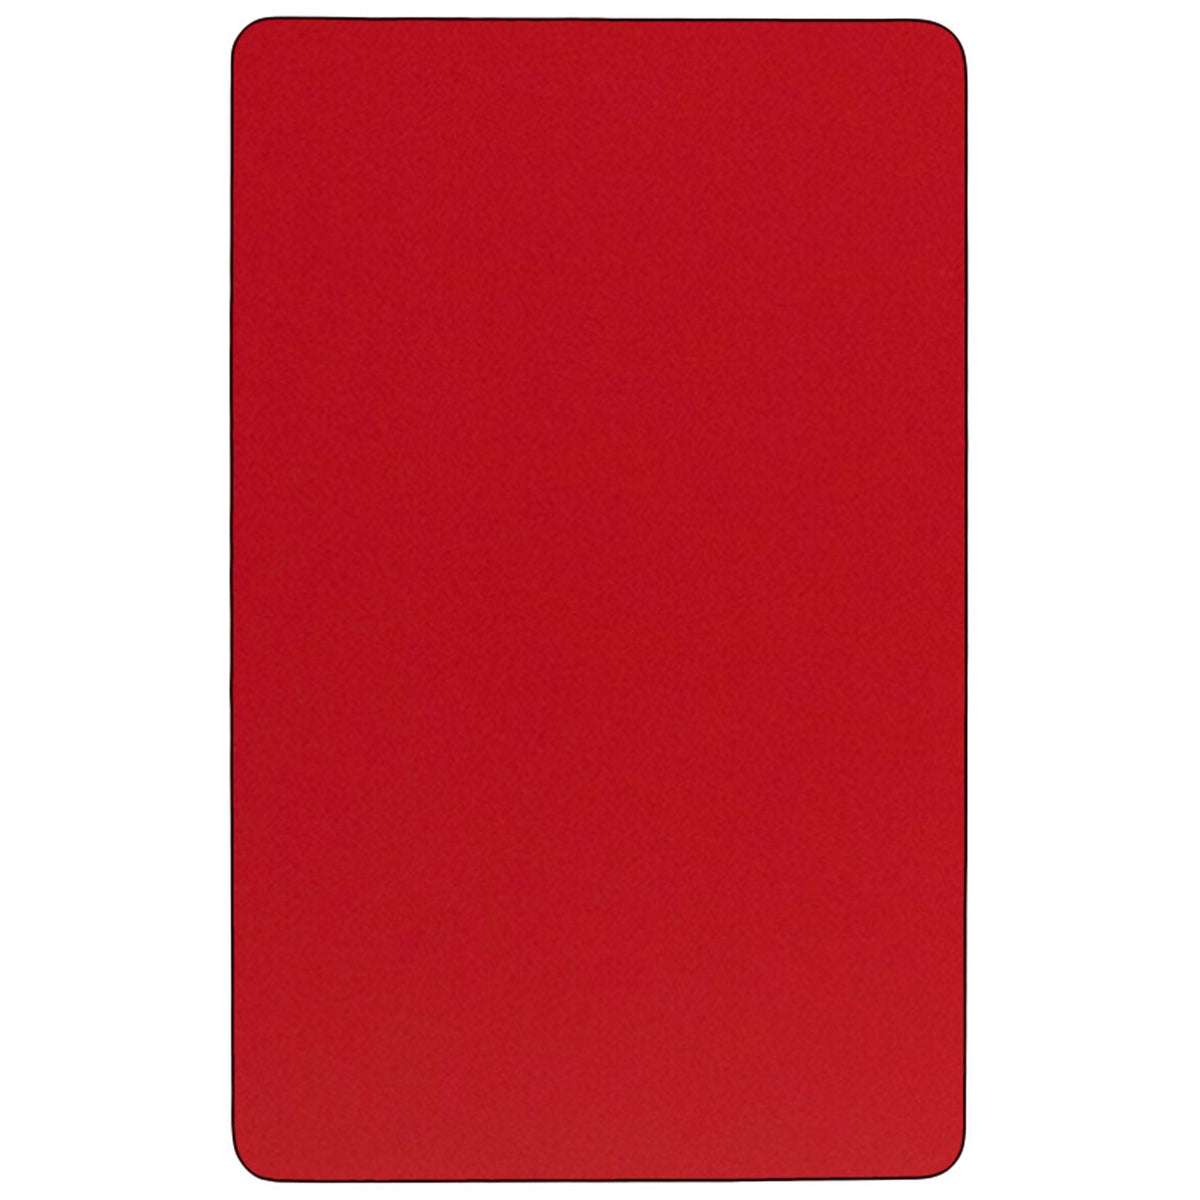 Red |#| 24inchW x 60inchL Rectangular Red HP Laminate Activity Table - Height Adjustable Legs